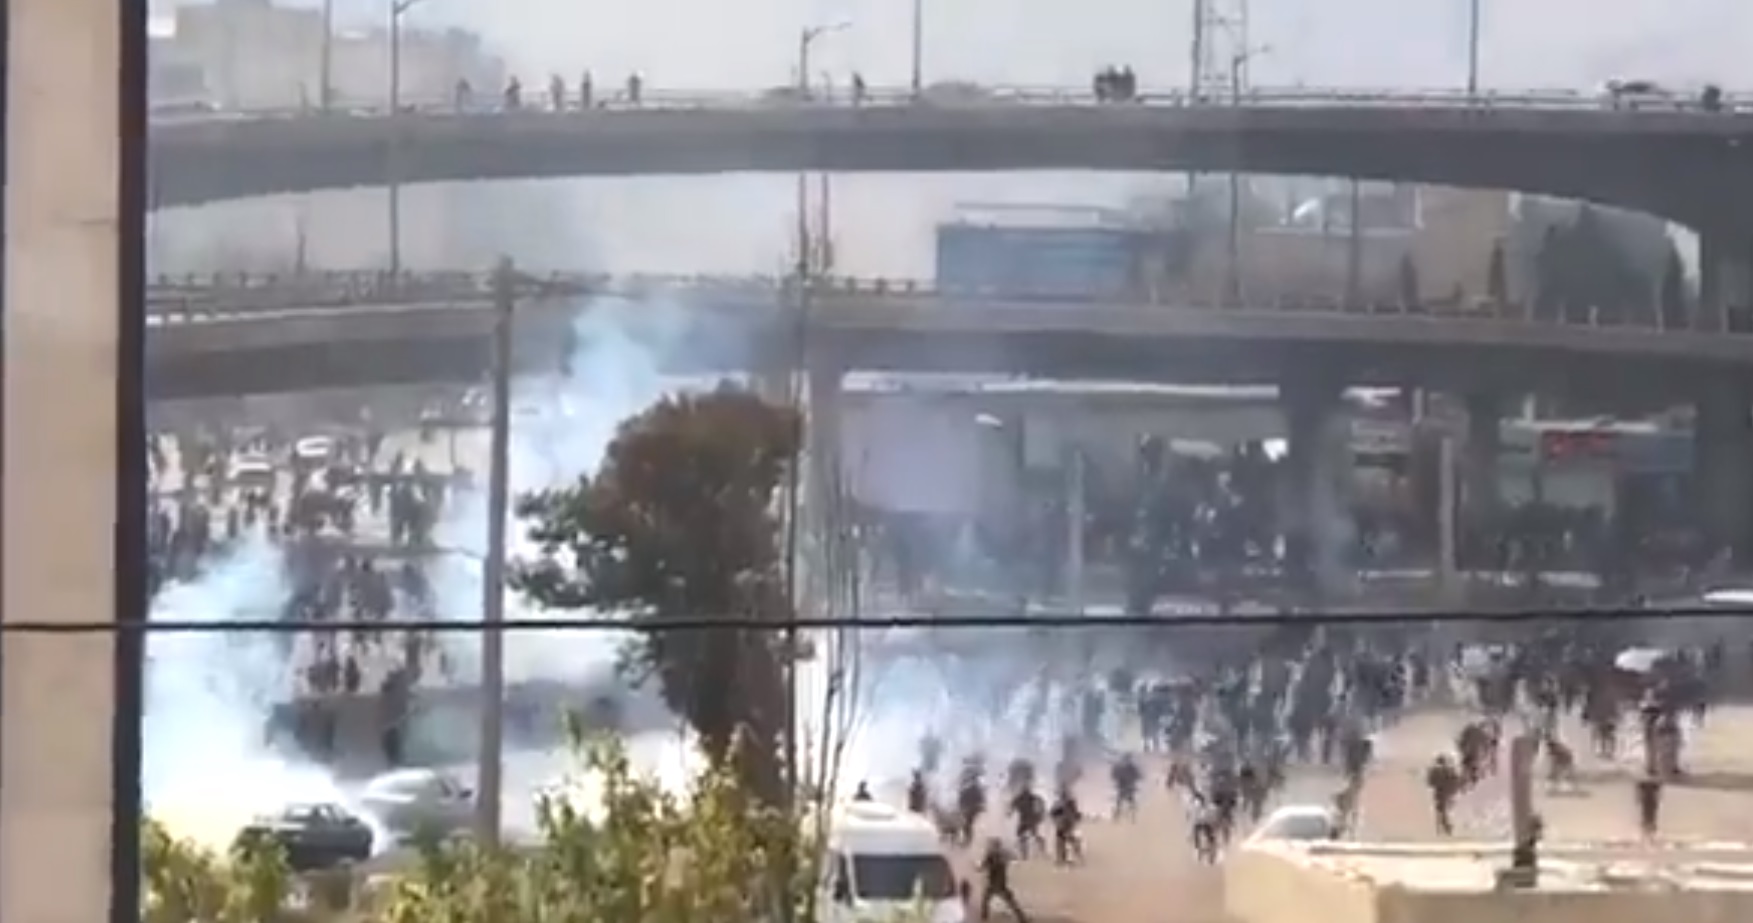 Shiraz, south-central Iran, new footage shows protesters forcing the regime's oppressive forces to retreat